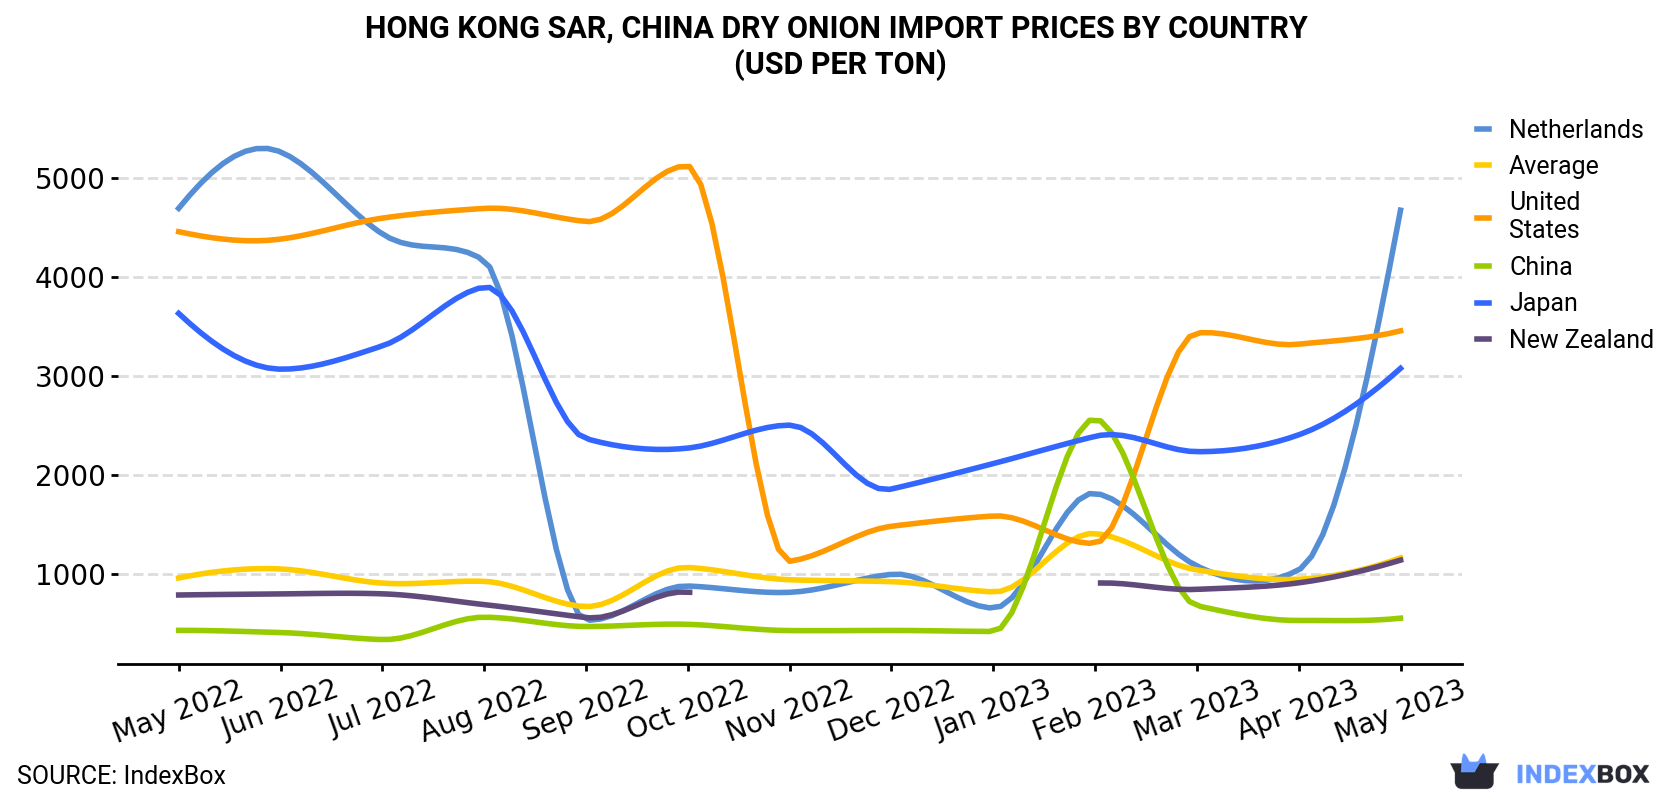 Hong Kong Dry Onion Import Prices By Country (USD Per Ton)